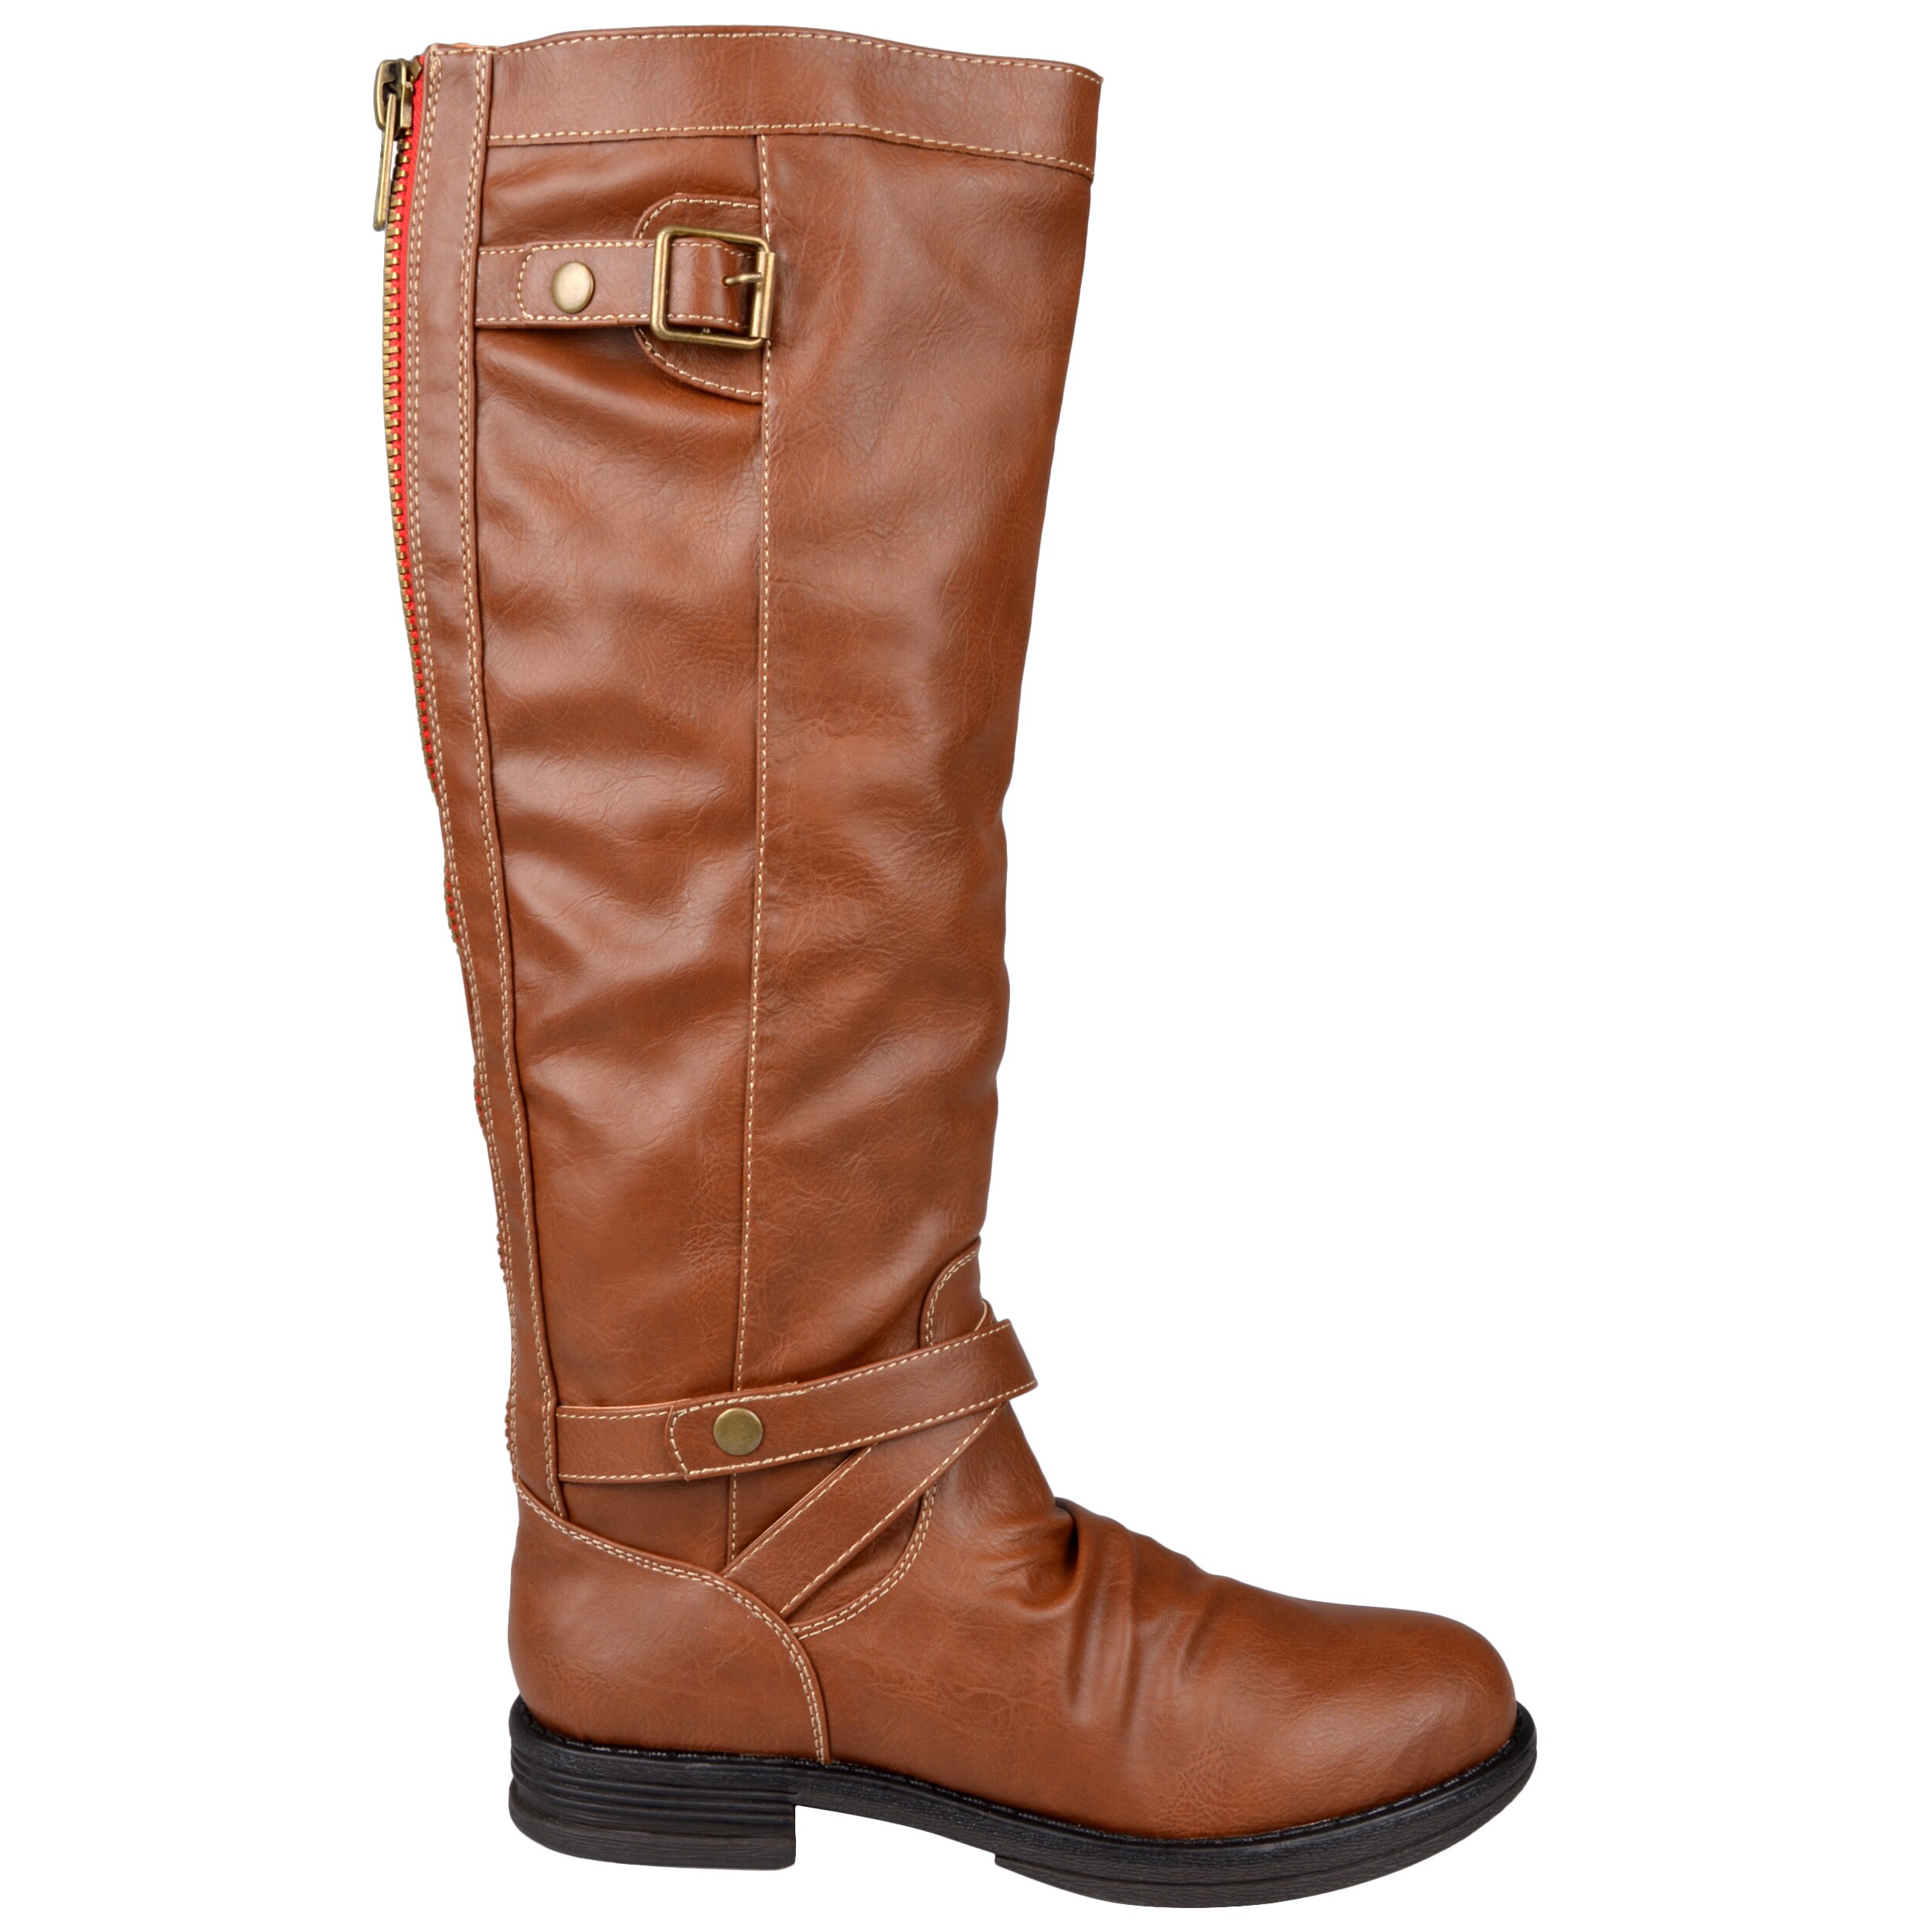 madden girl boots with red zipper